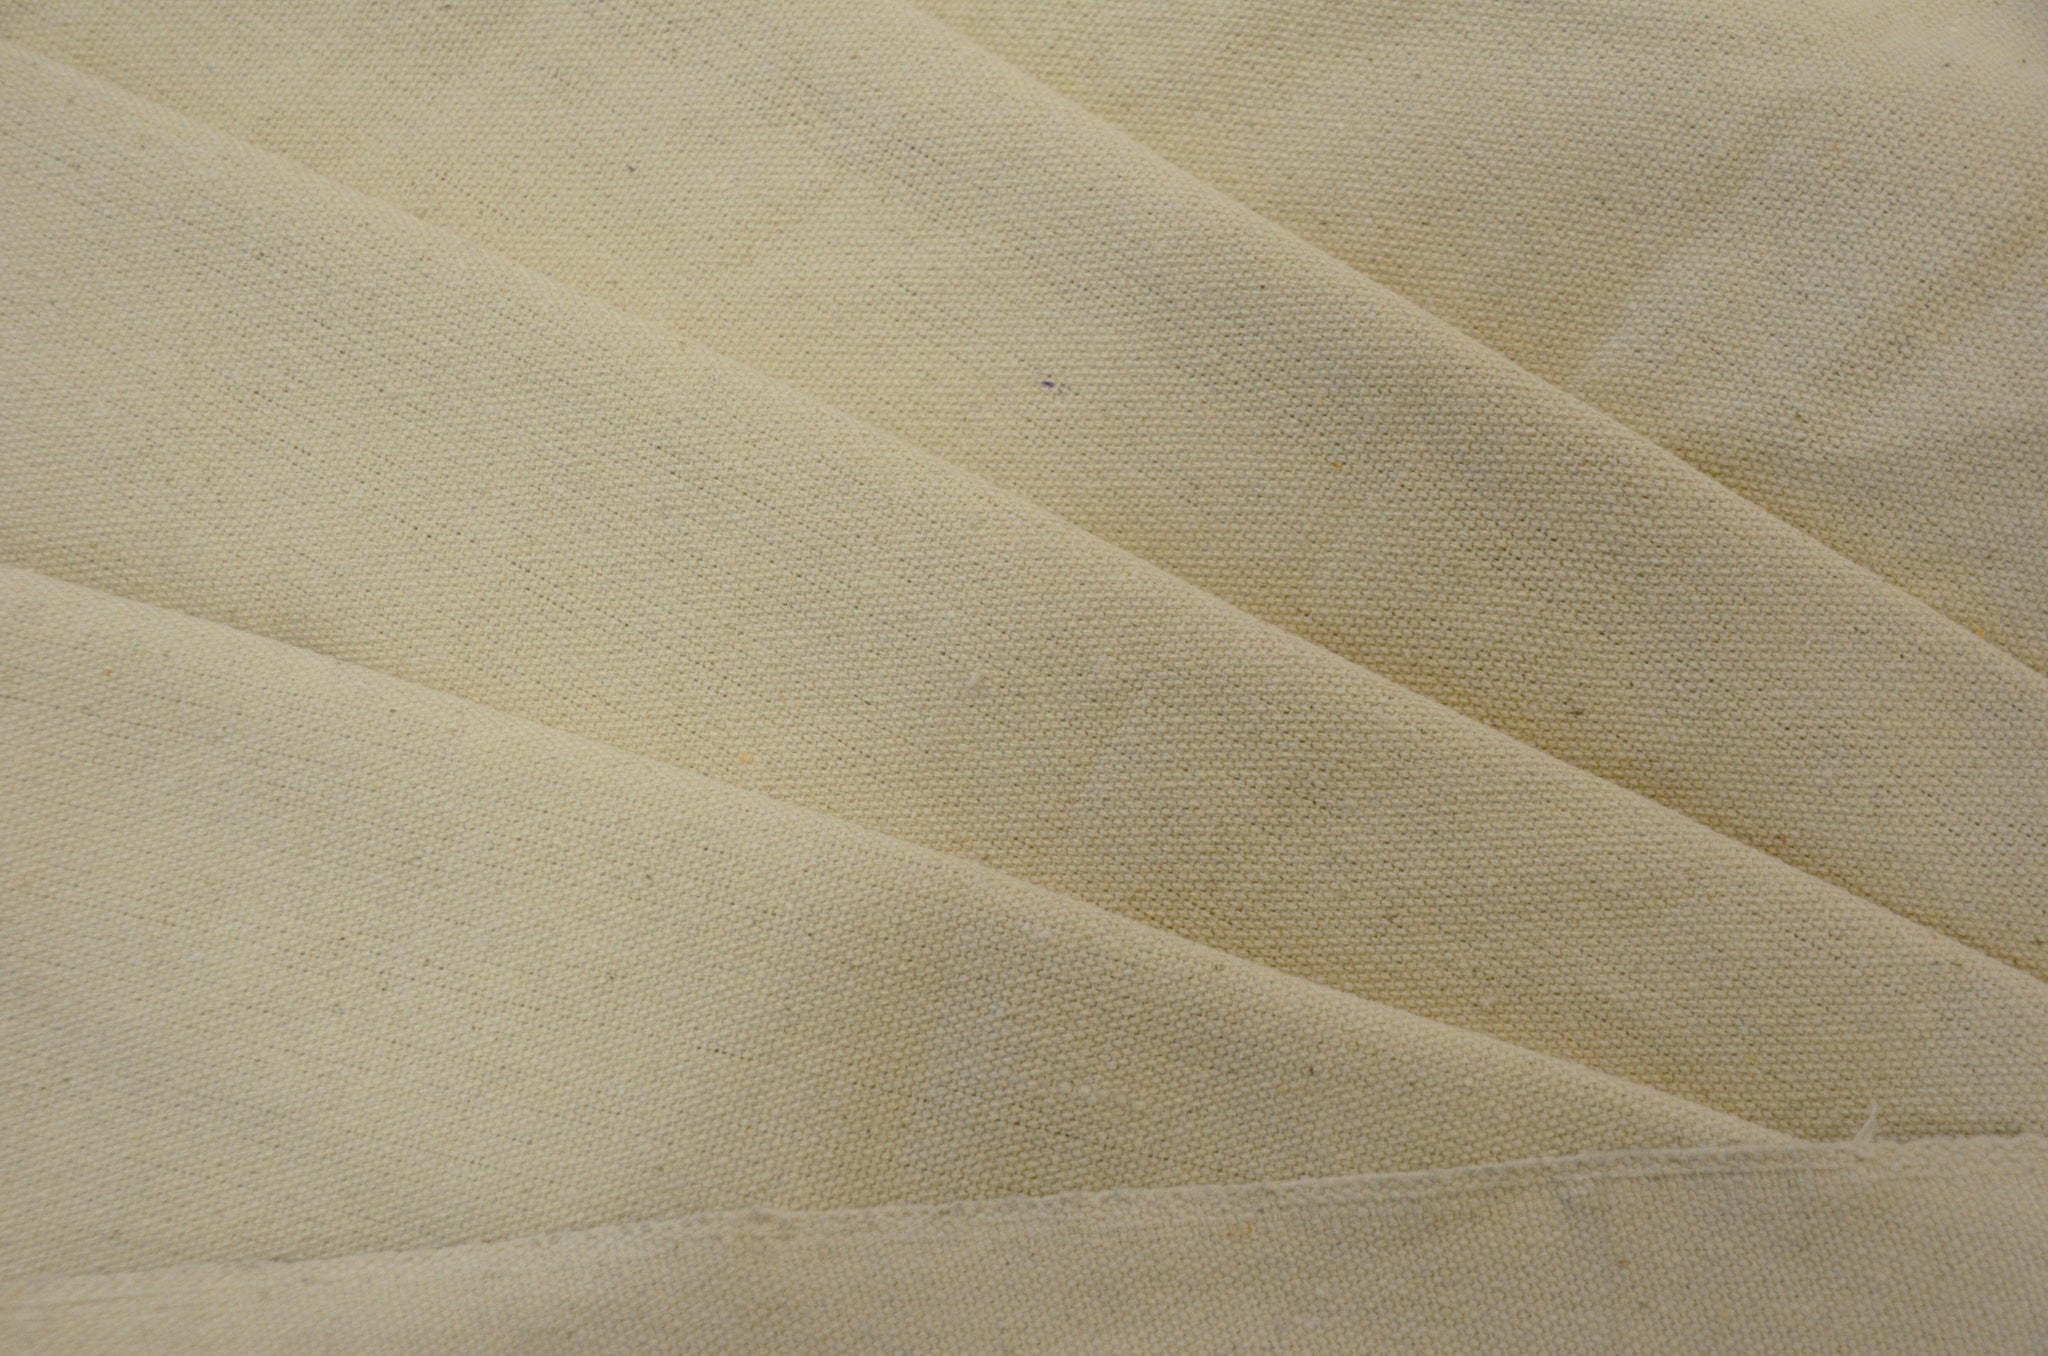 Natural 100% Cotton 60 wide Unbleched Muslin Fabric by the yard